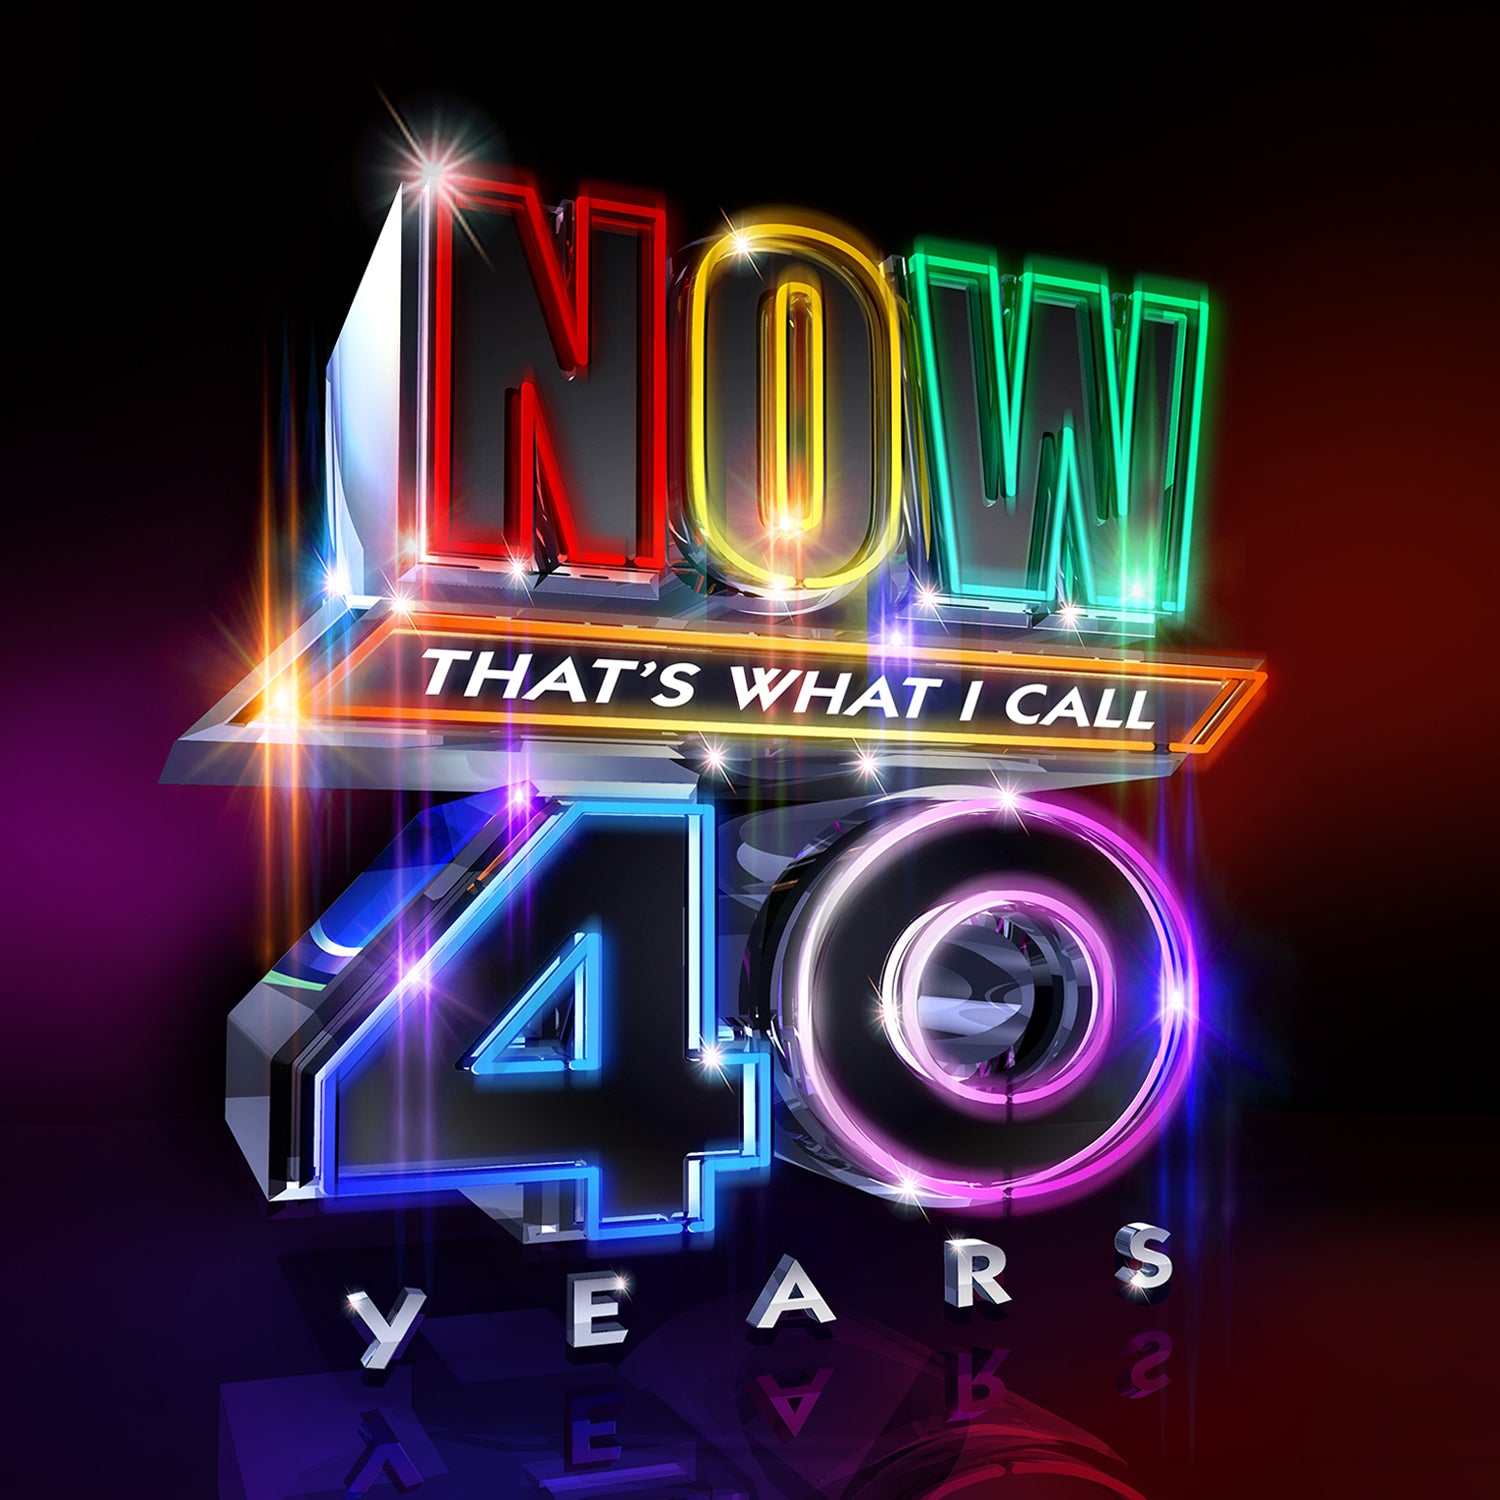 Various Artists - NOW That's What I Call 40 Years (5CD).